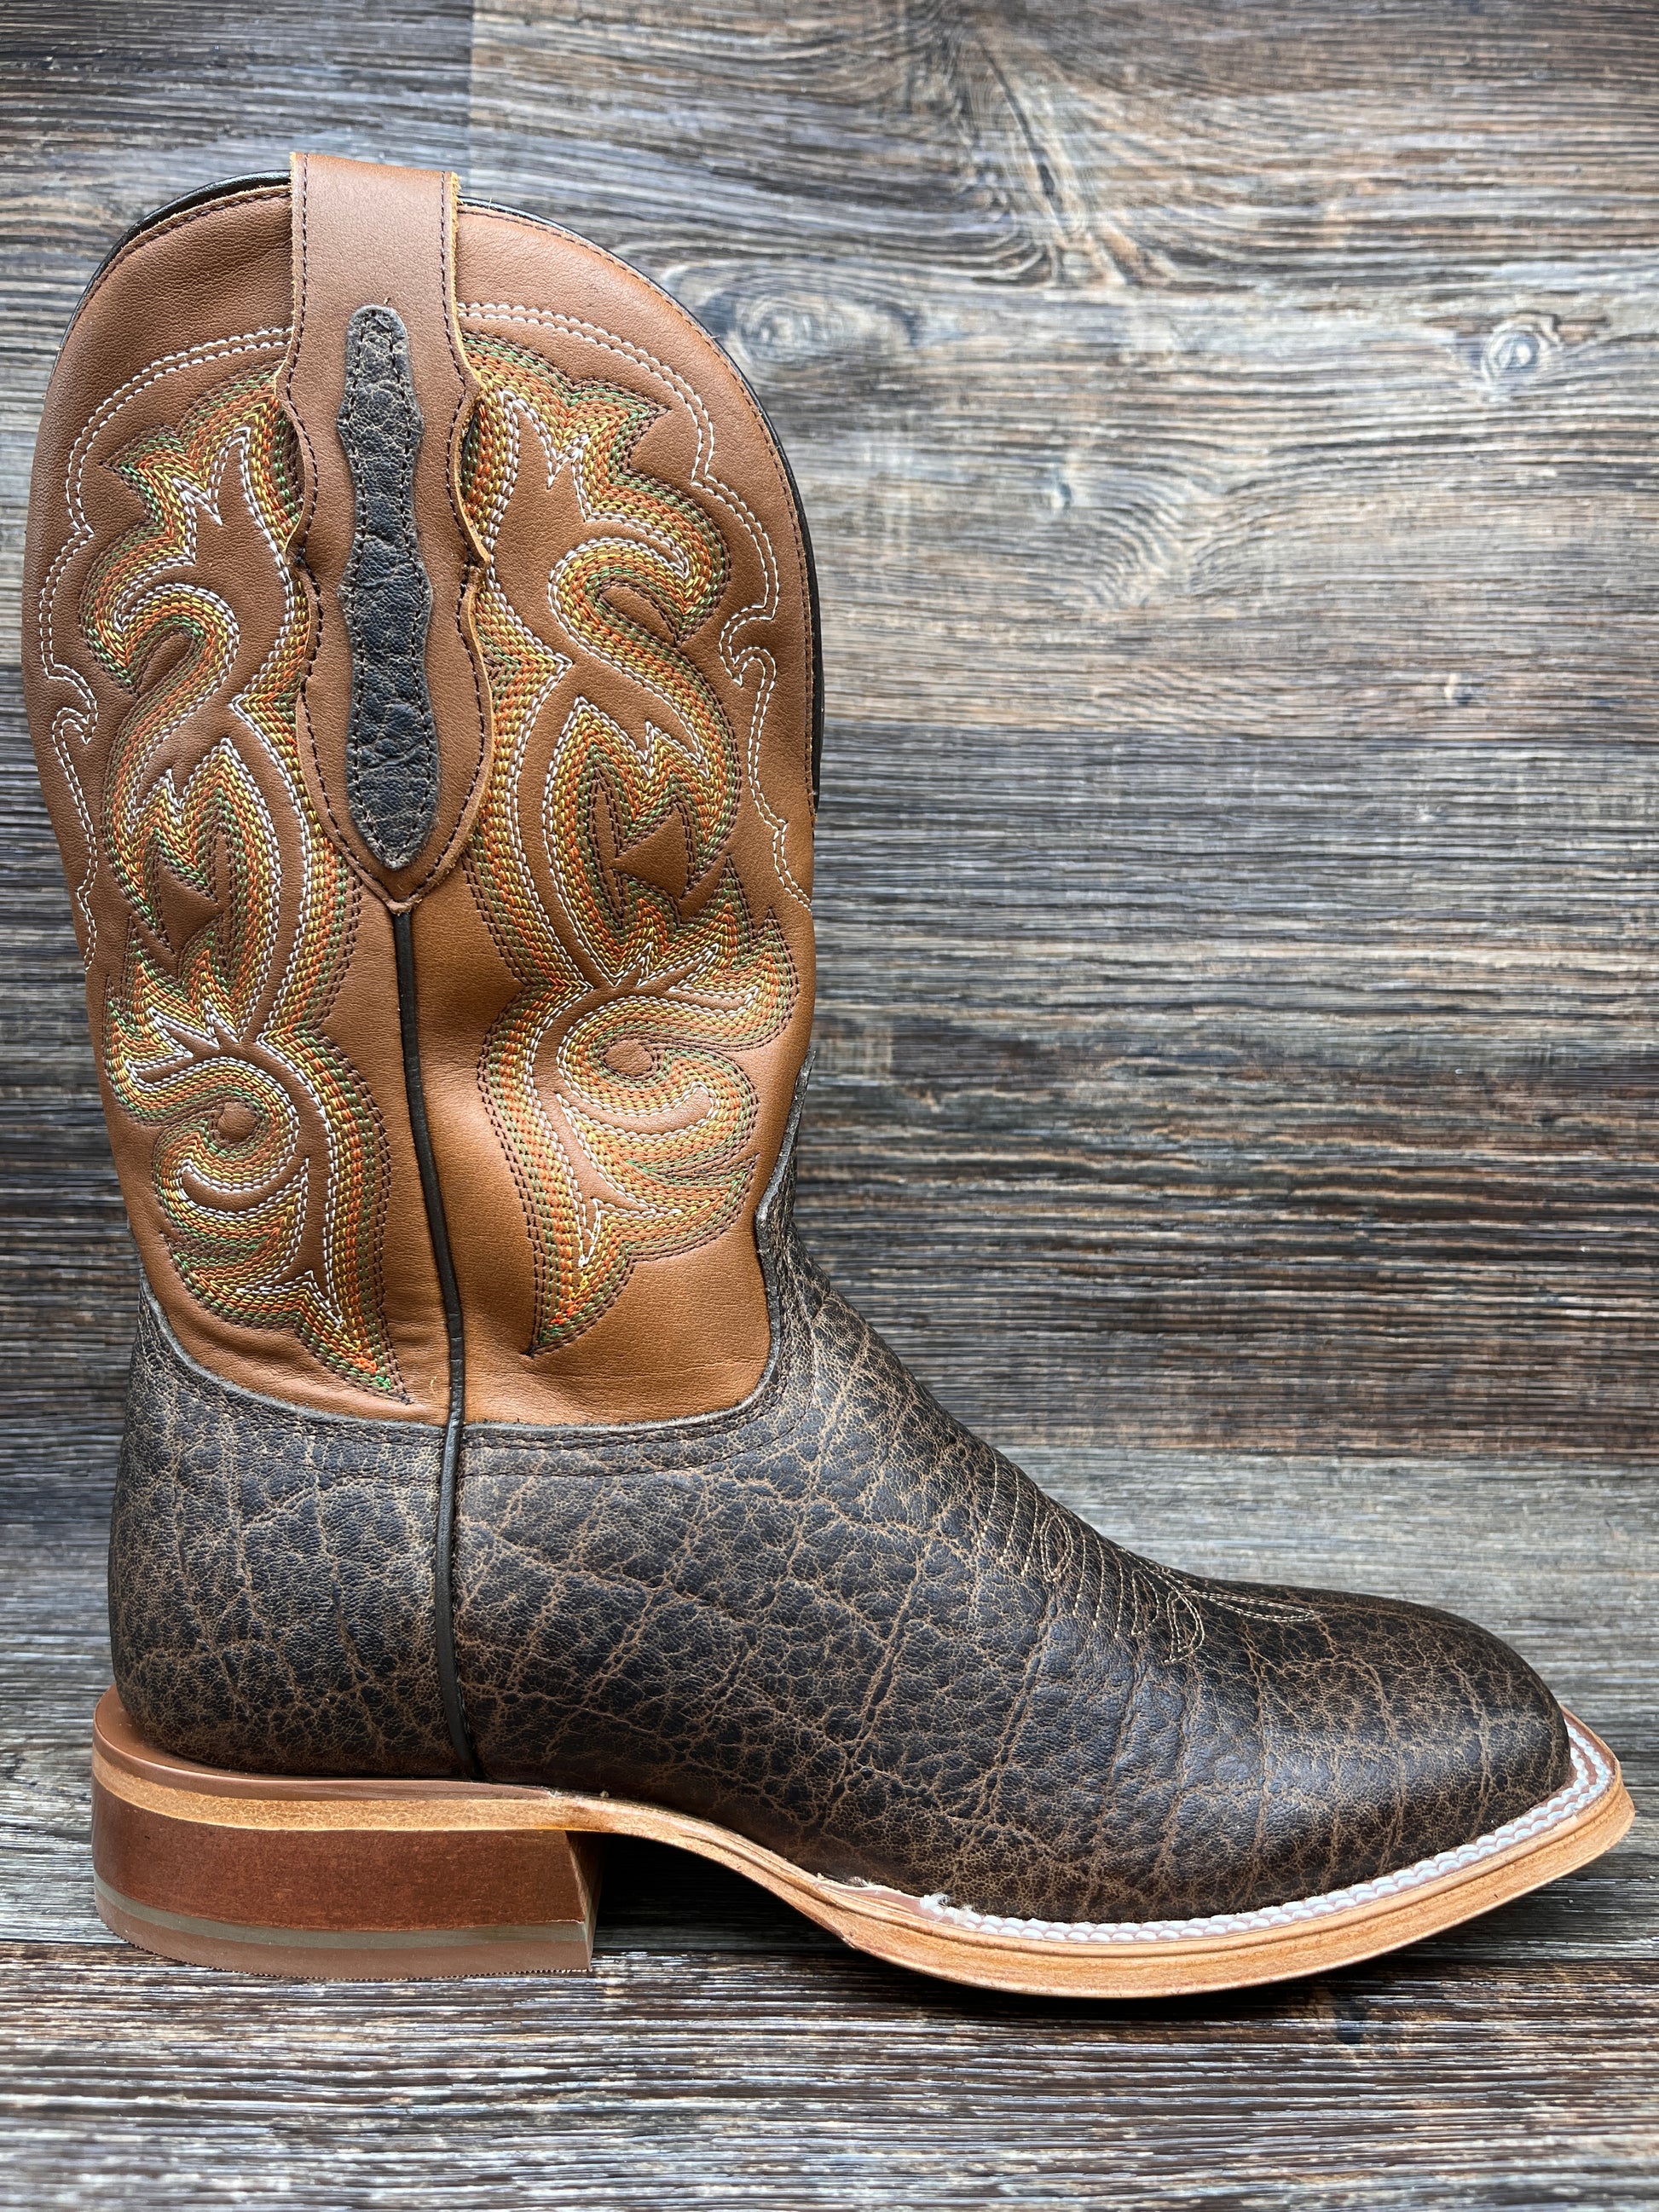 Tony Lama Boots, A Legacy in Bootmaking Since 1911